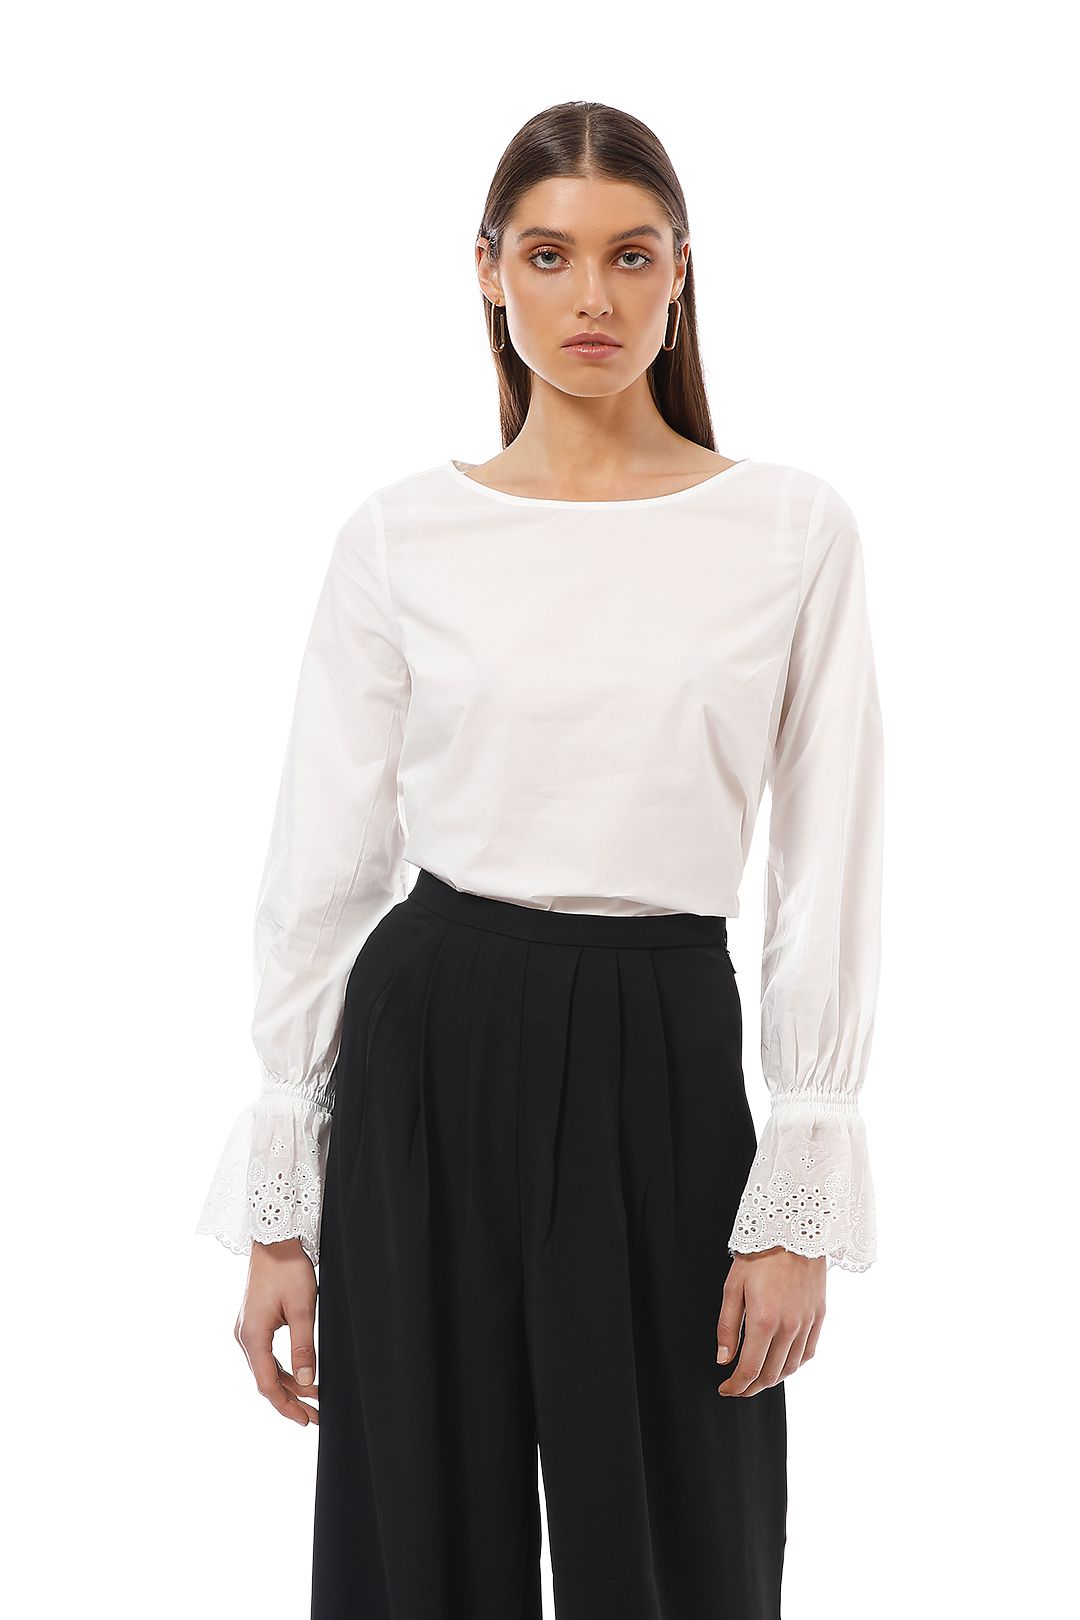 Friend of Audrey - Camille Embroidered Blouse - White - Front Crop